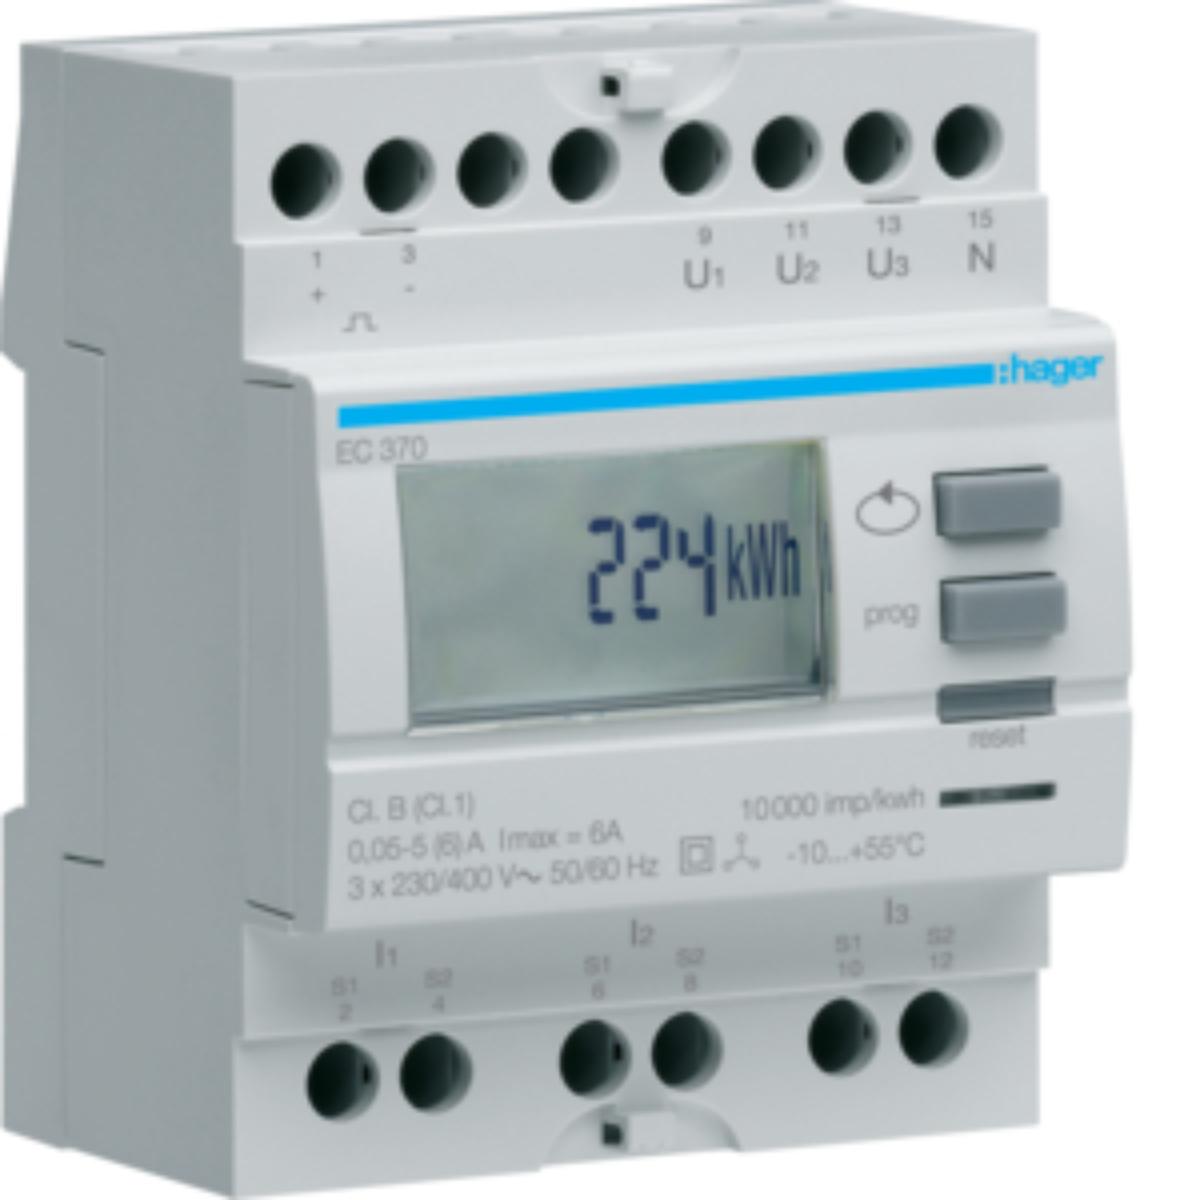 METER KWH 3PH CONN VIA CT PULSED OUTPUT